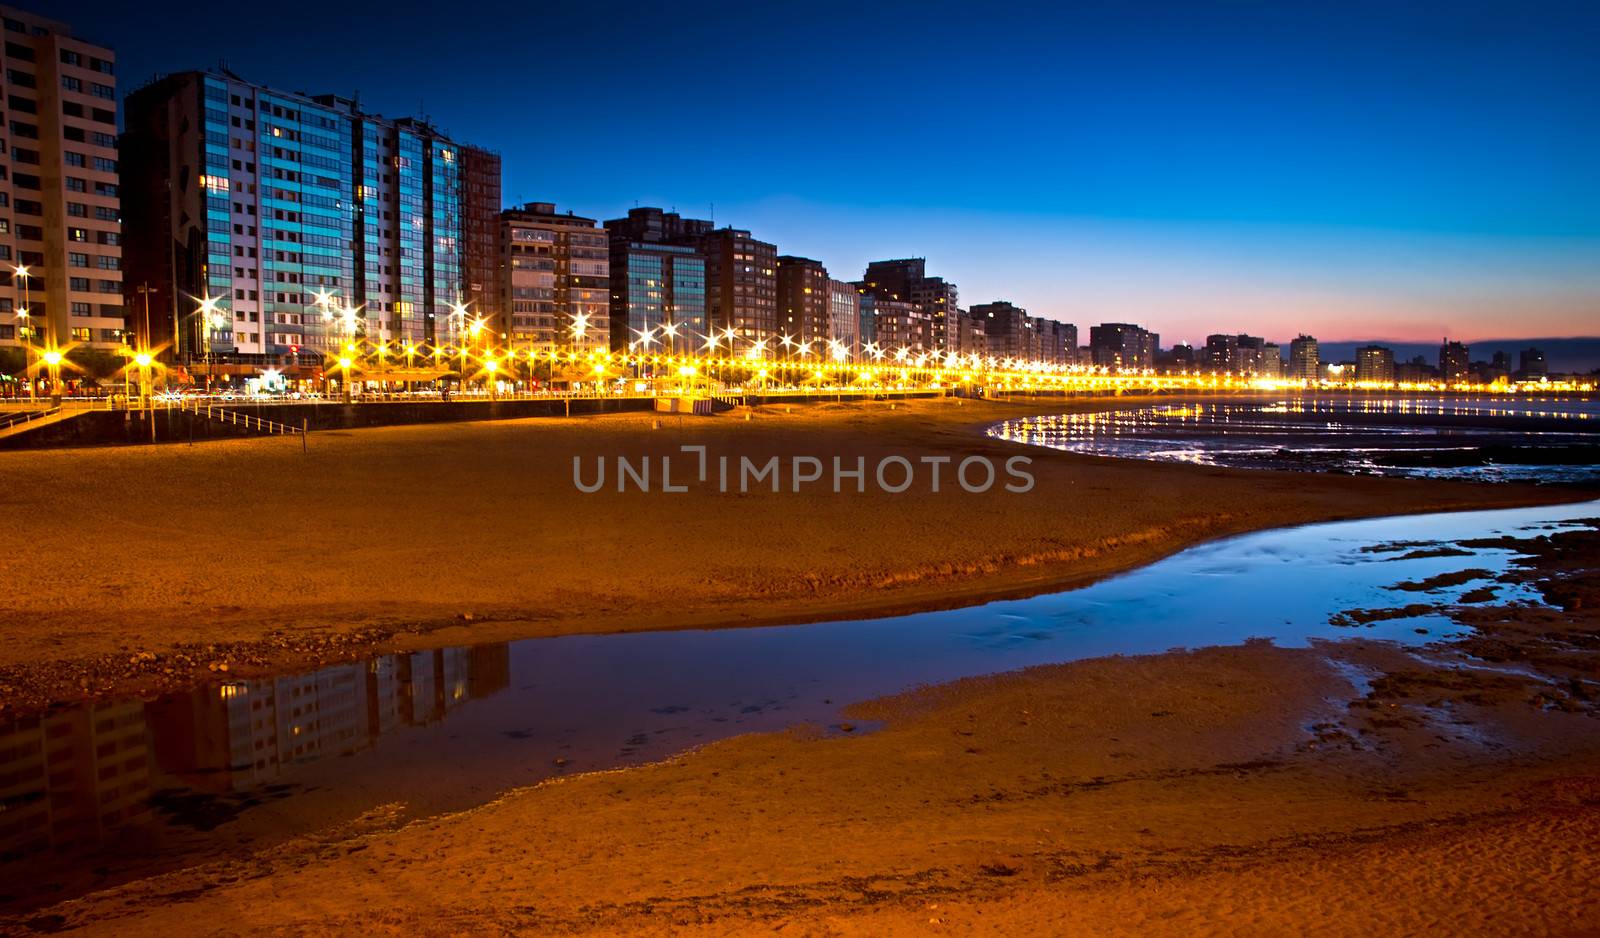 sunset on a city beach by marco_govel